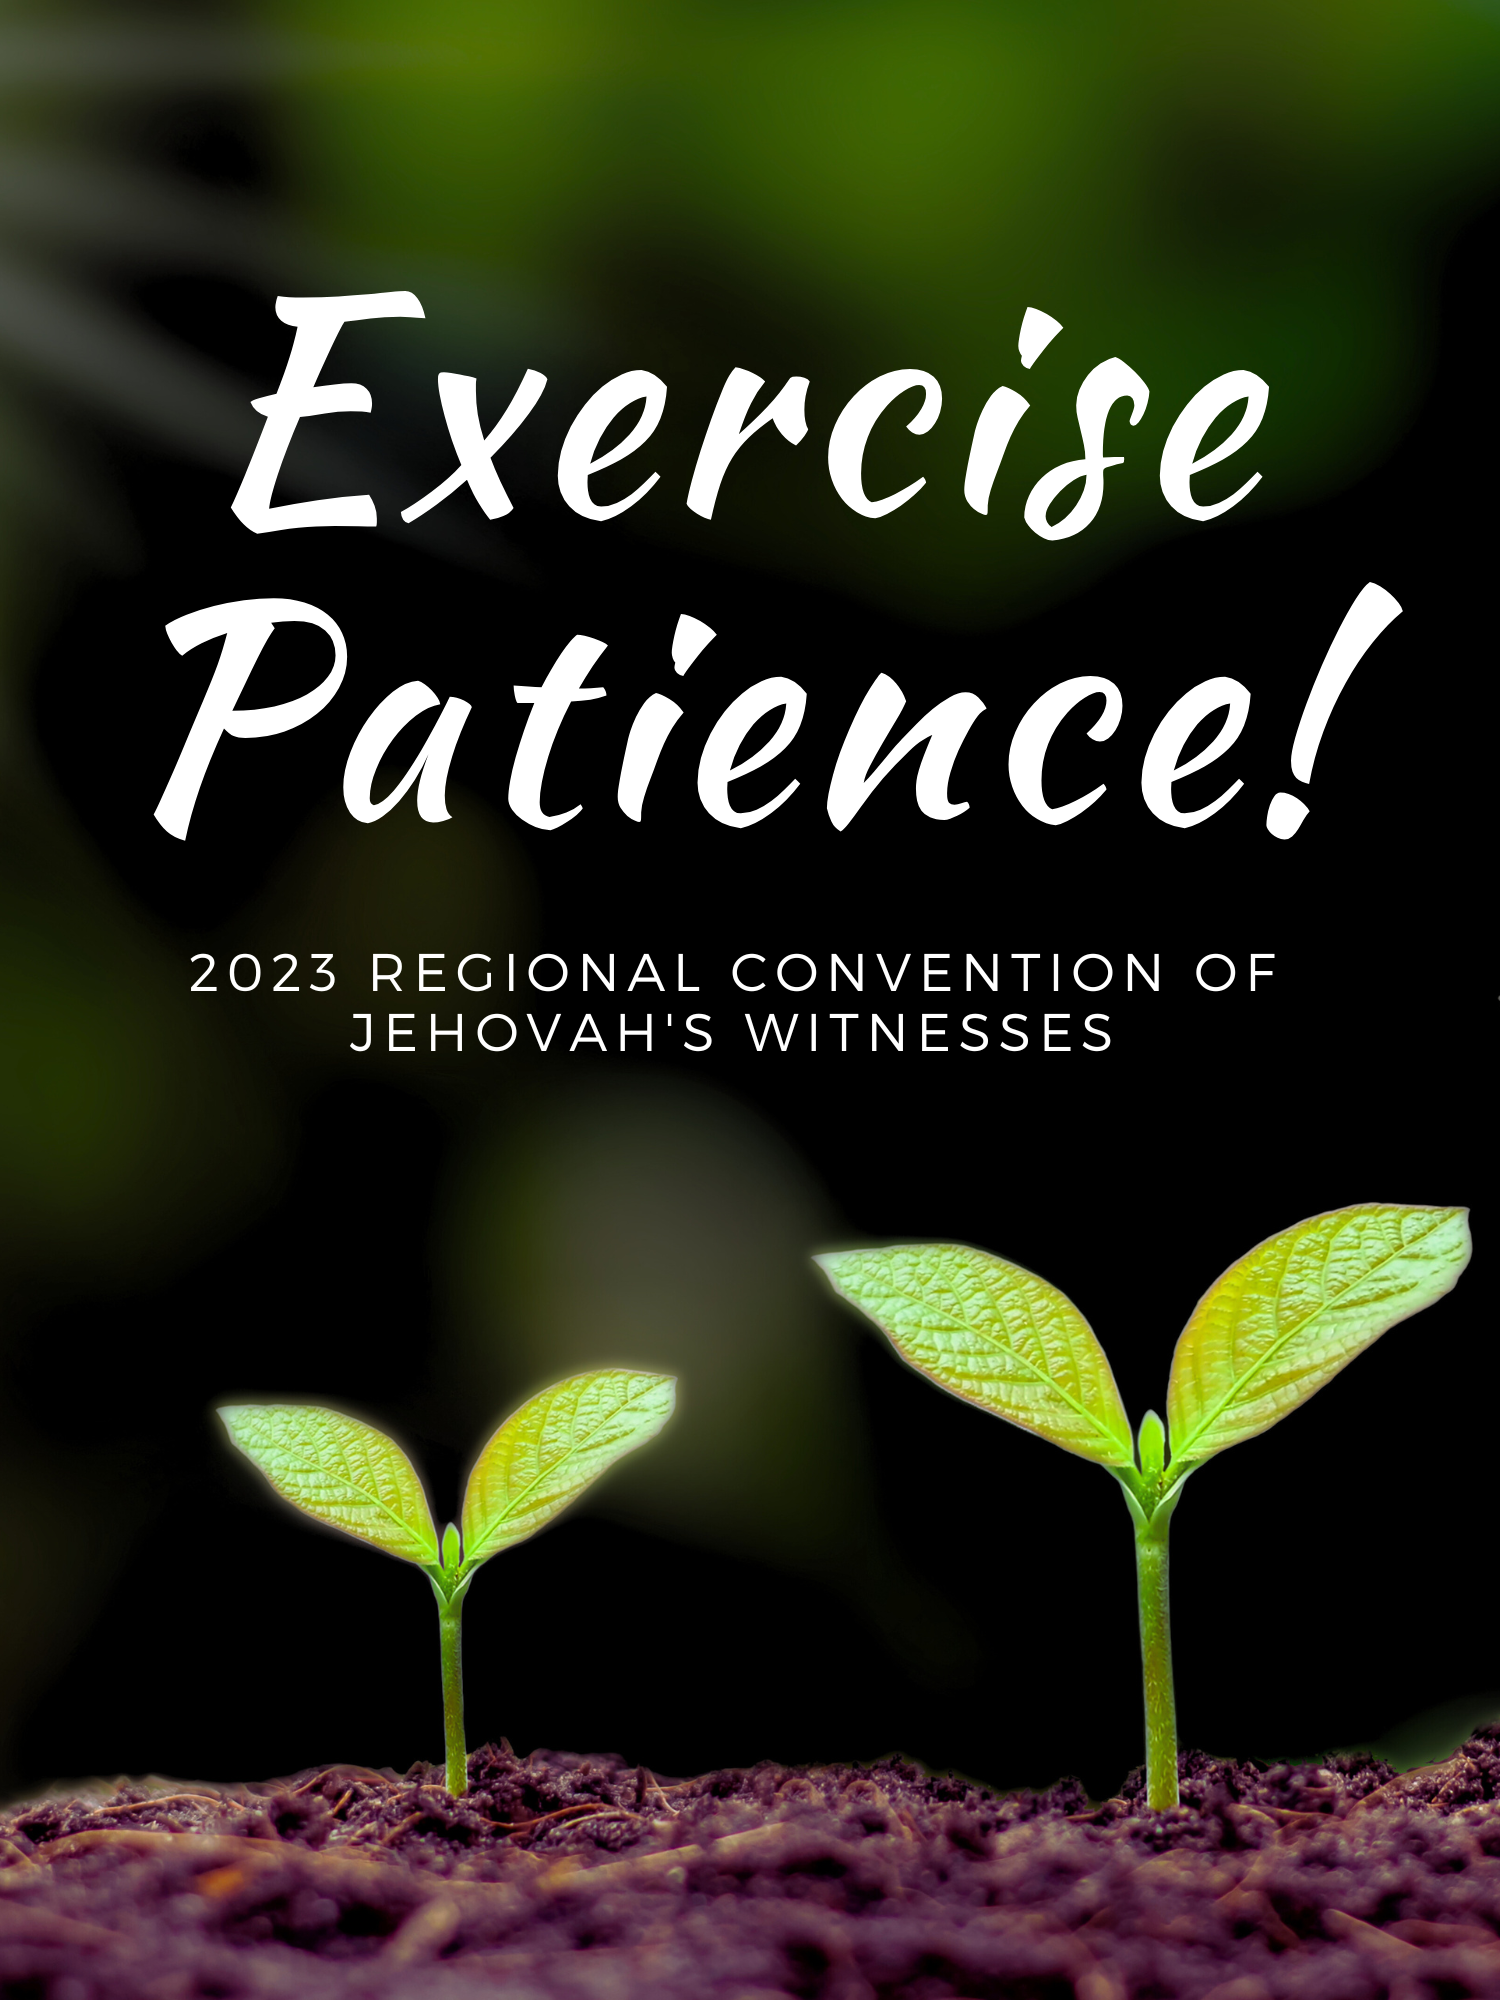 Exercise Patience! 2023 Convention, JW Gift Tags